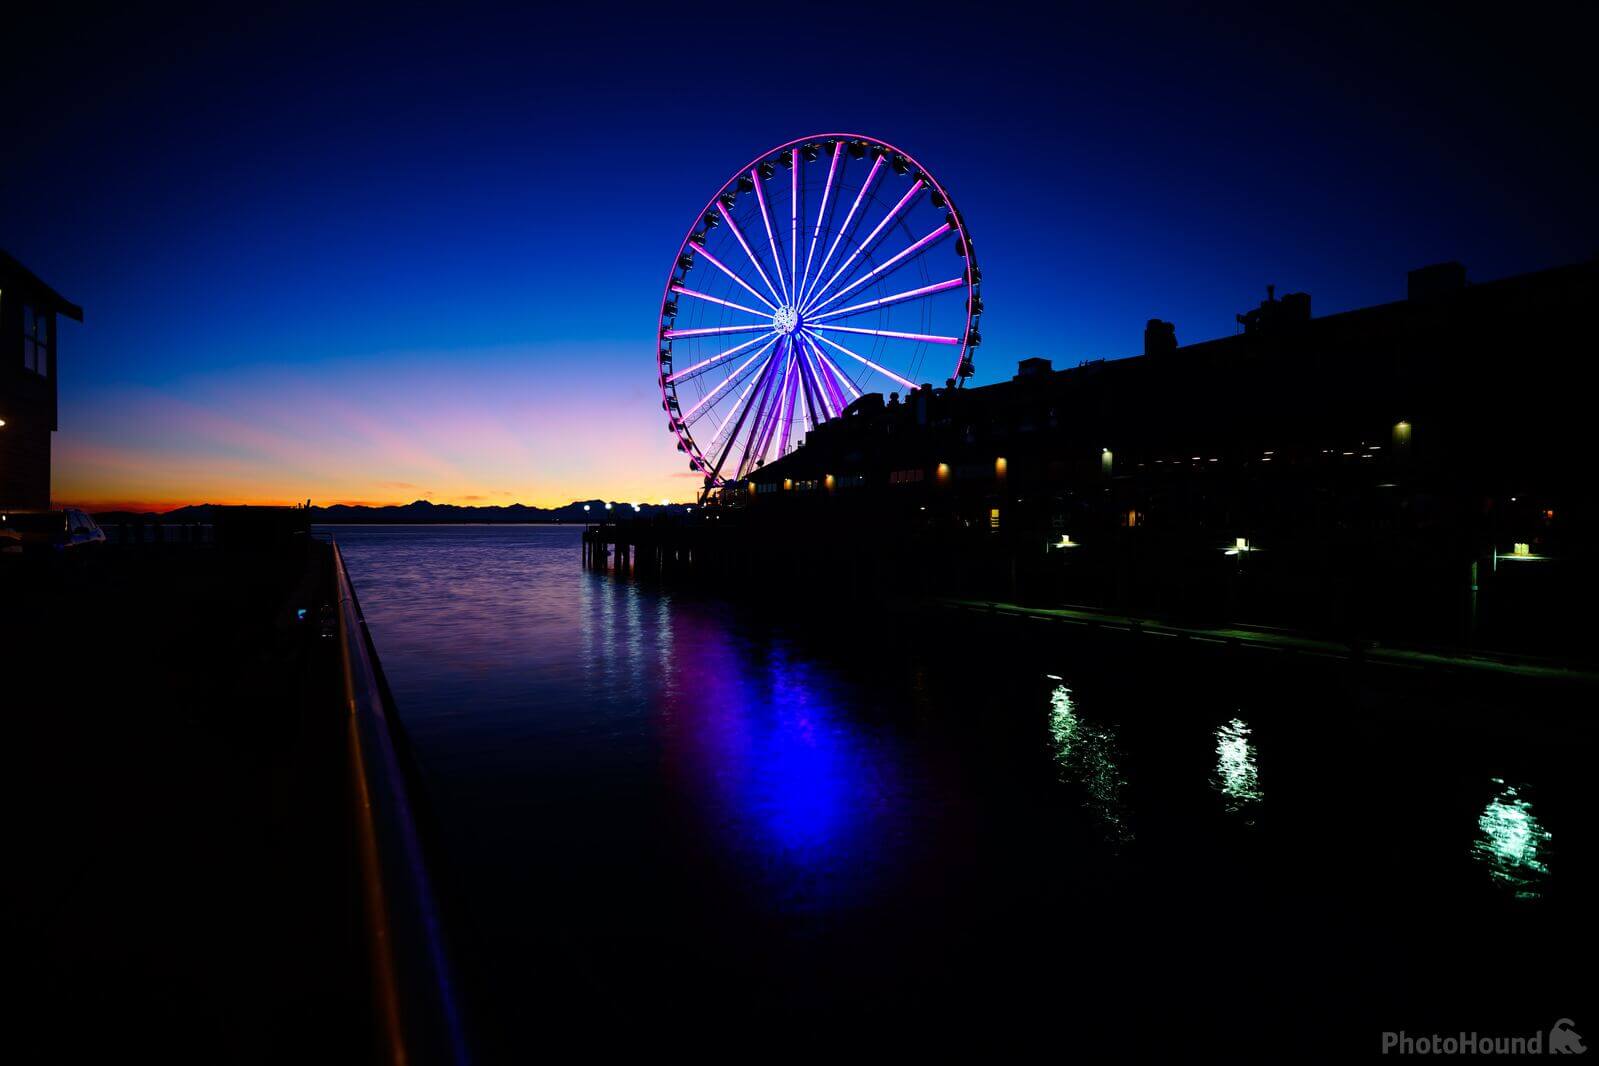 Image of The Great Wheel by Team PhotoHound